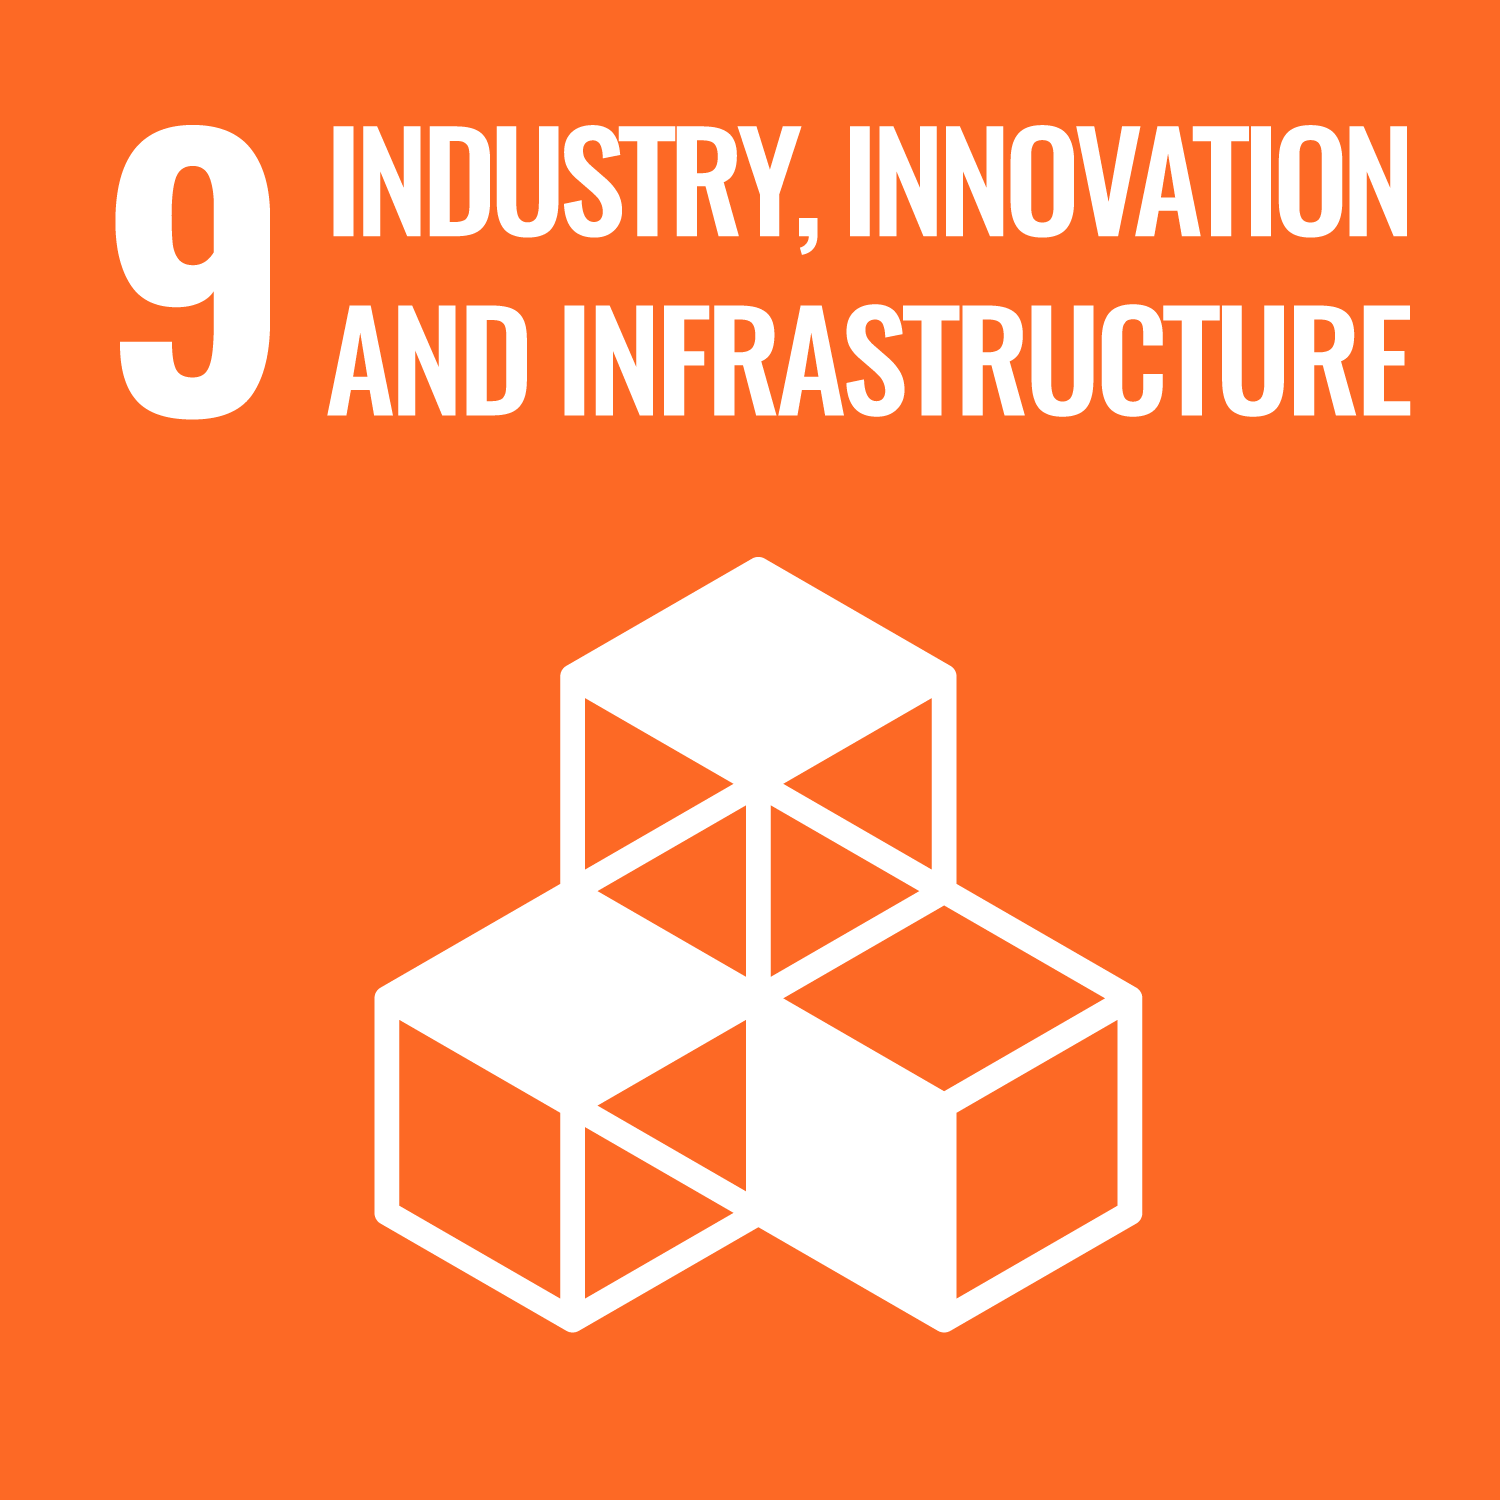 9．INDUSTRY, INNOVATION AND INFRASTRUCTURE